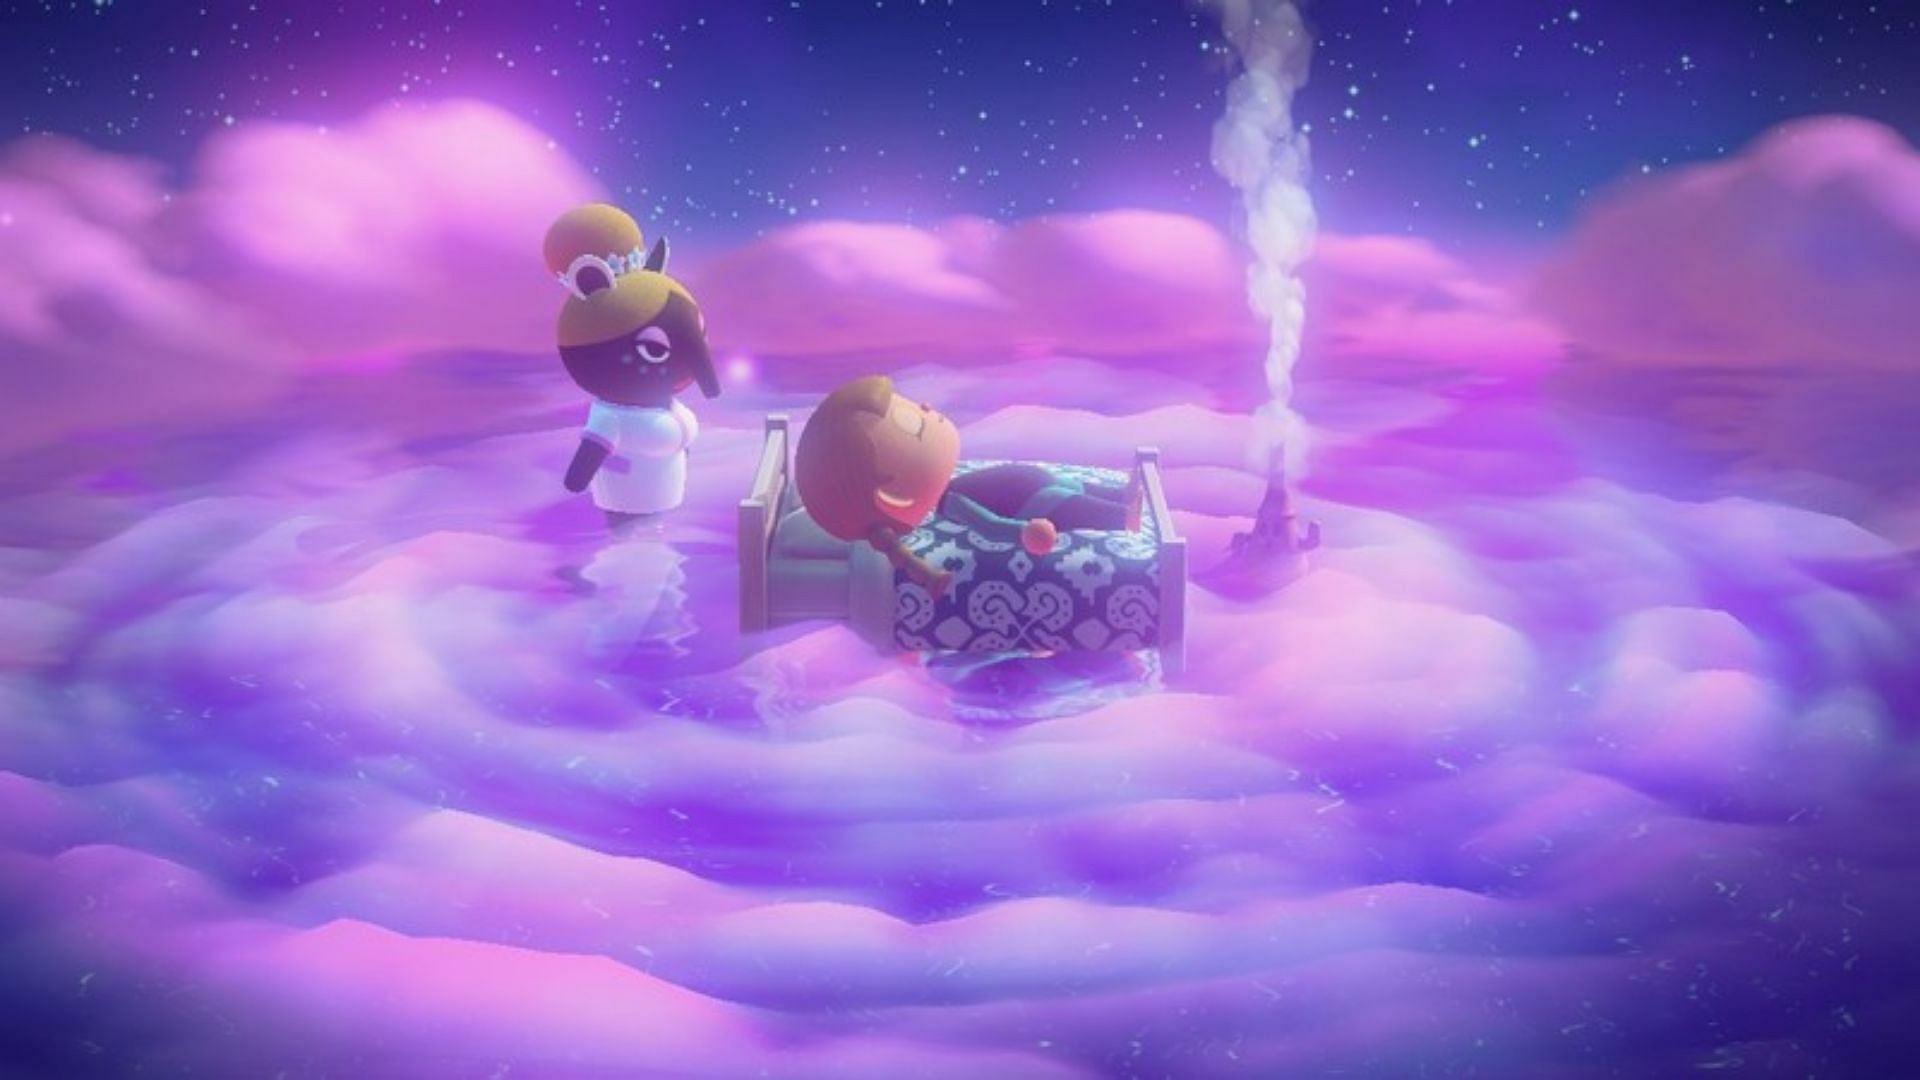 Dreaming is quite a simple thing to do in Animal Crossing: New Horizons (Image via Animal Crossing World)